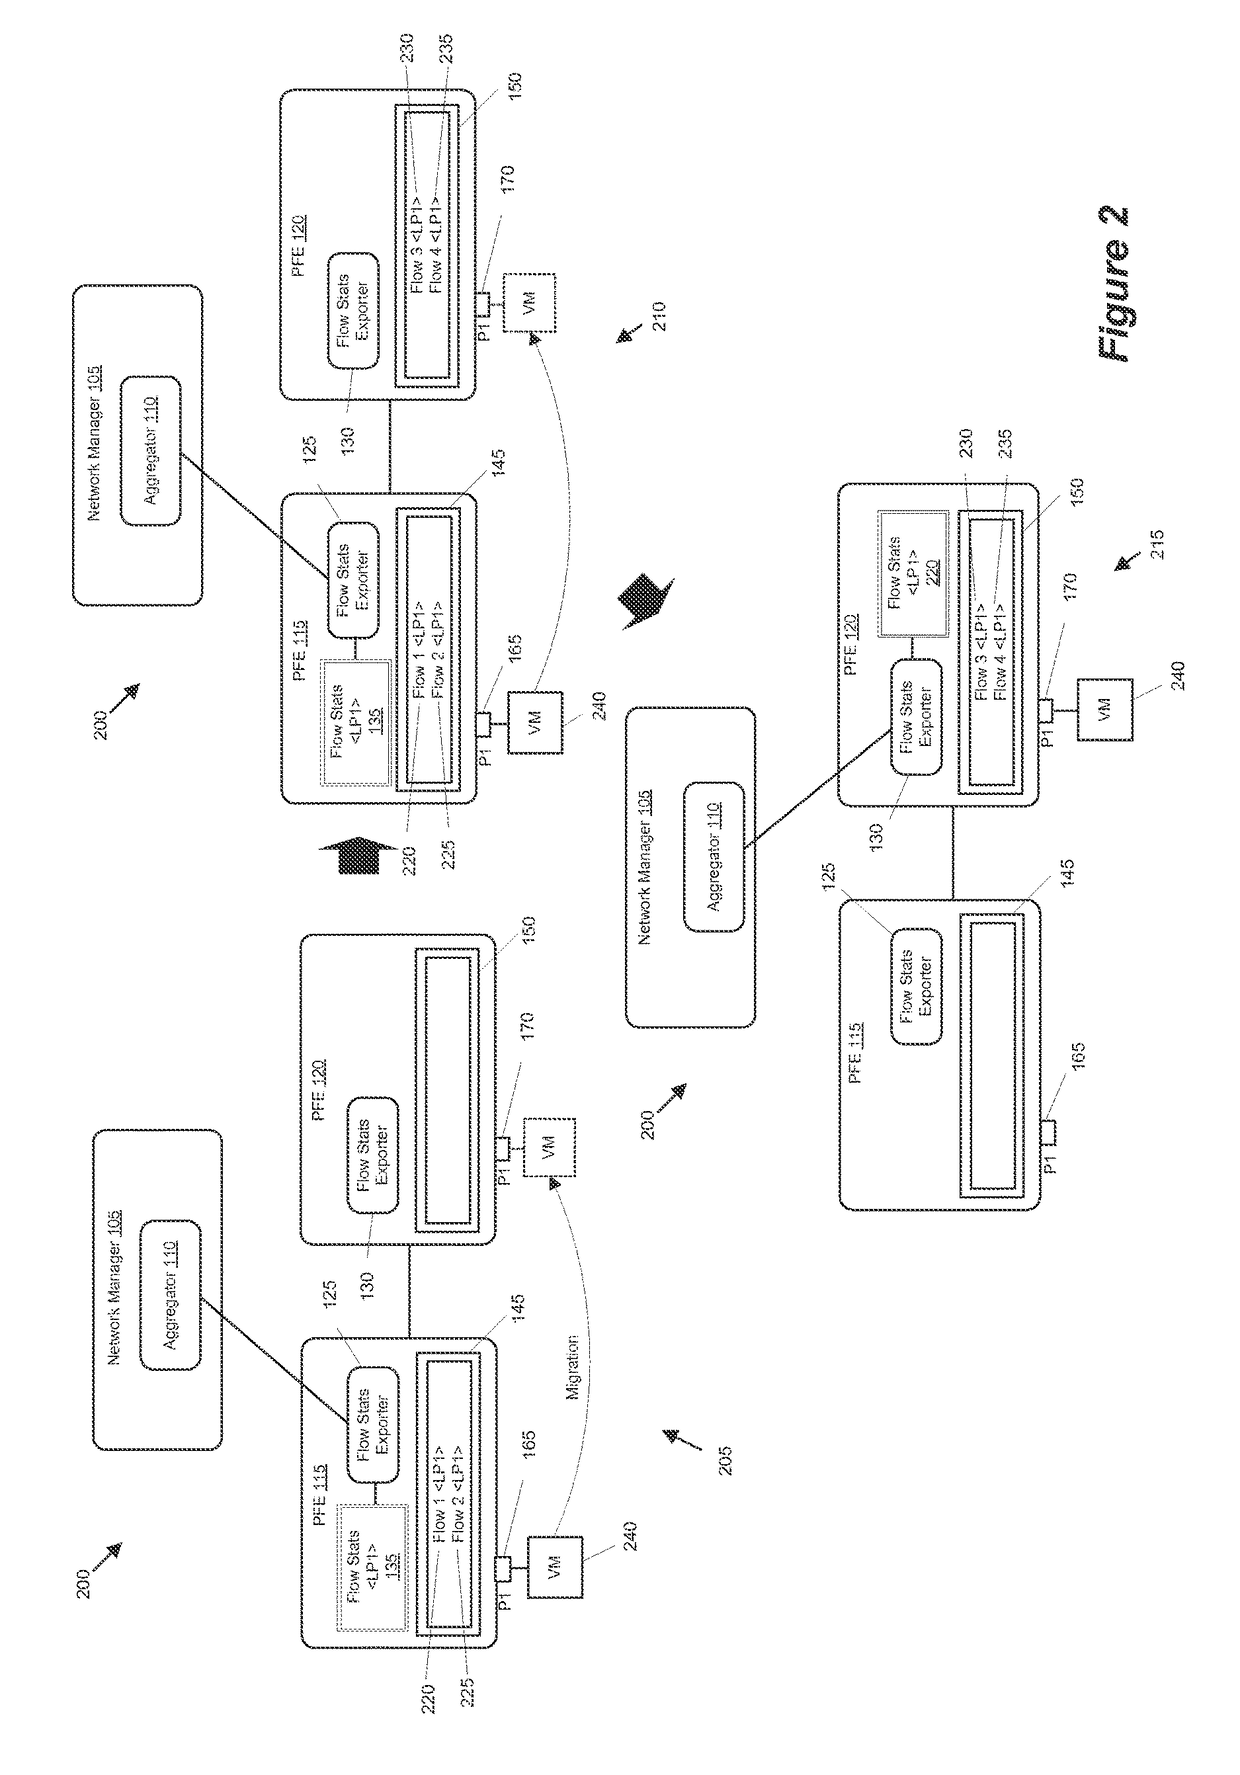 Network virtualization operations using a scalable statistics collection framework